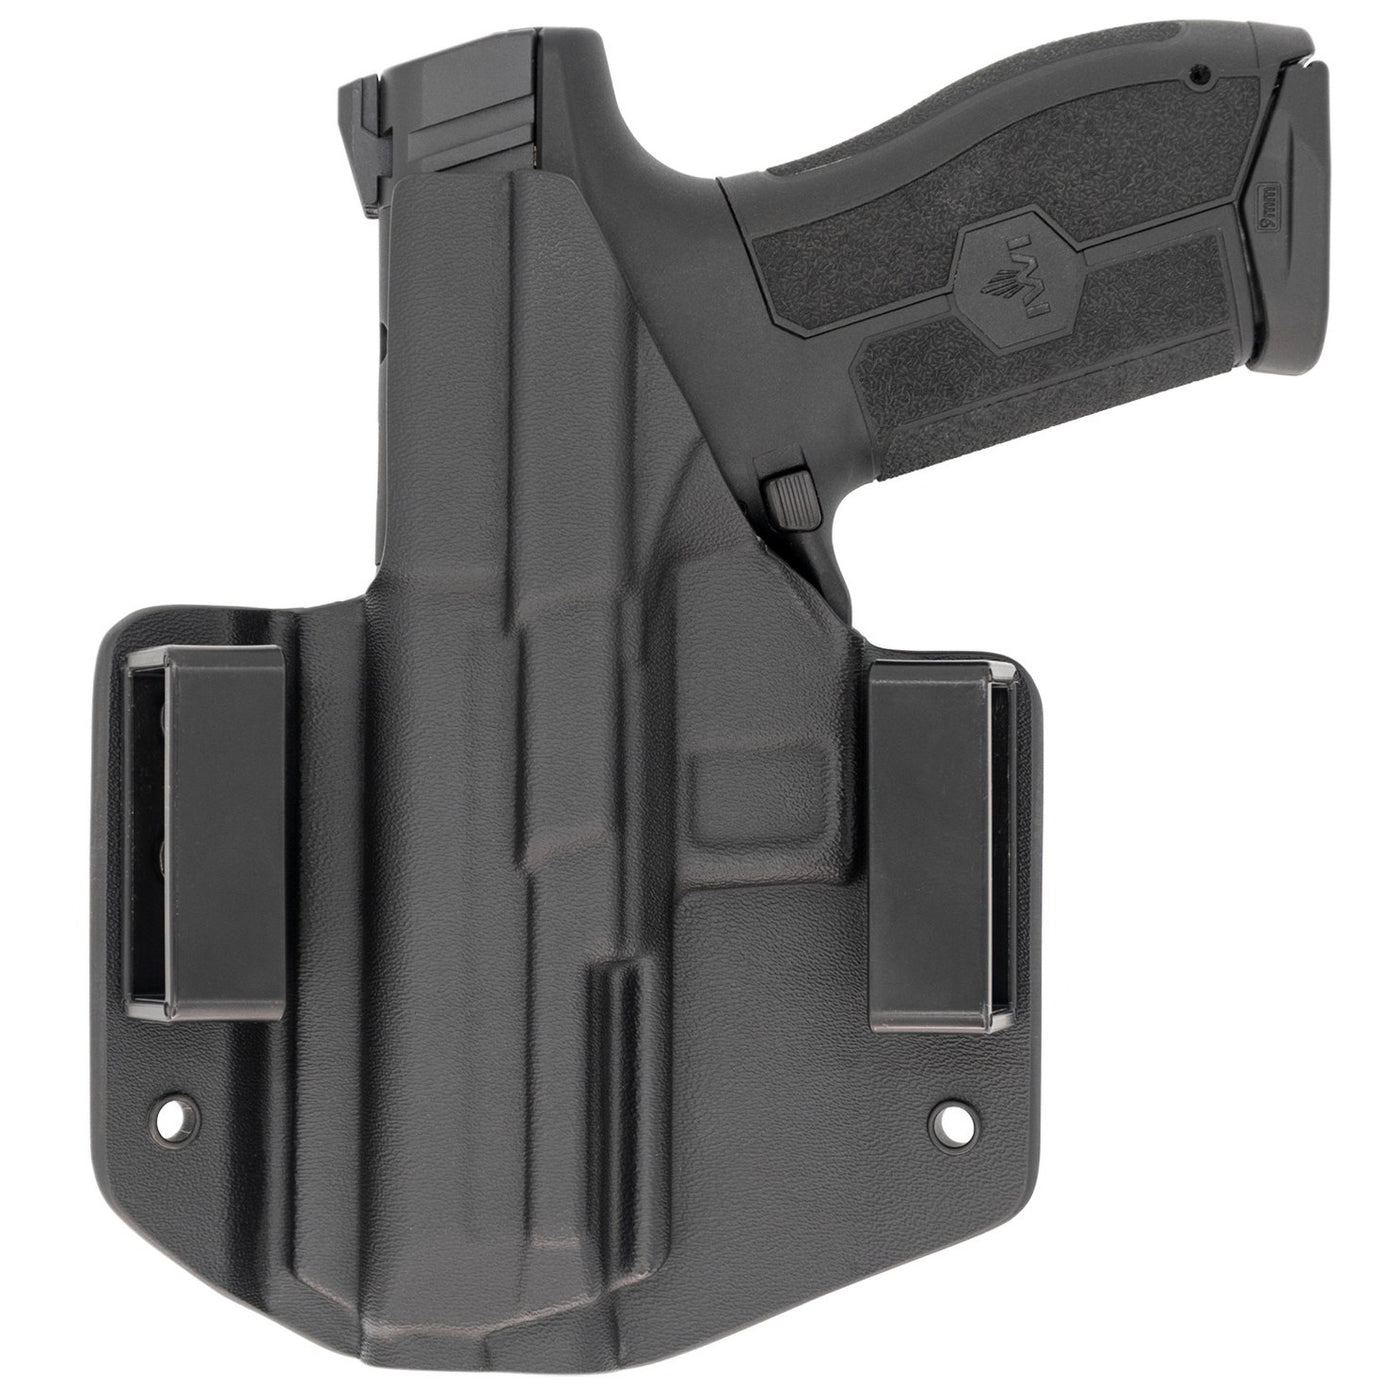 This is a custom C&G Holsters Covert Series Outside the waistband holster for an IWI Masada 9mm firearm showing the rear with the gun. 